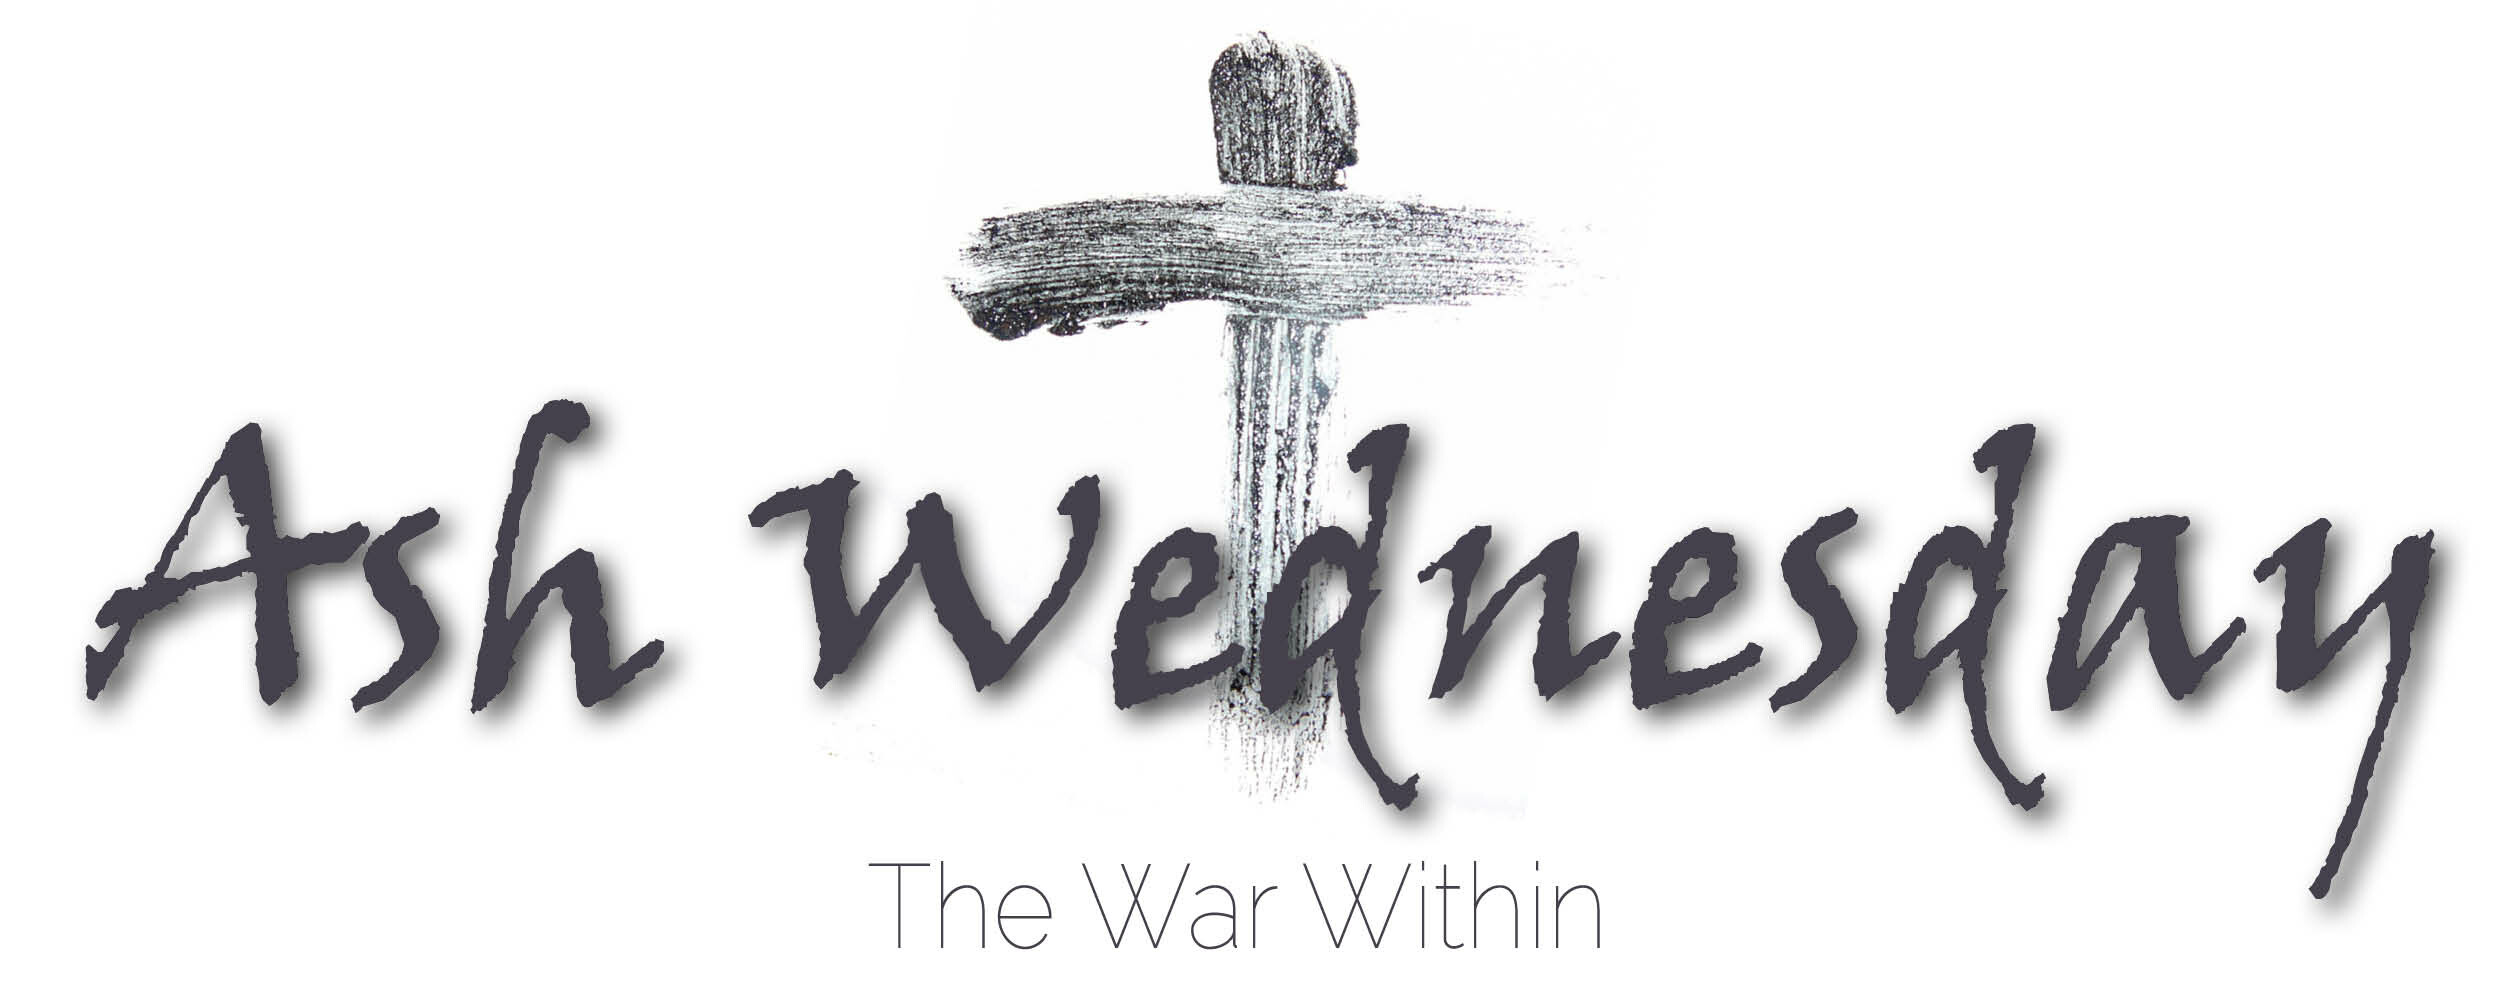 Ash Wednesday, The War Within